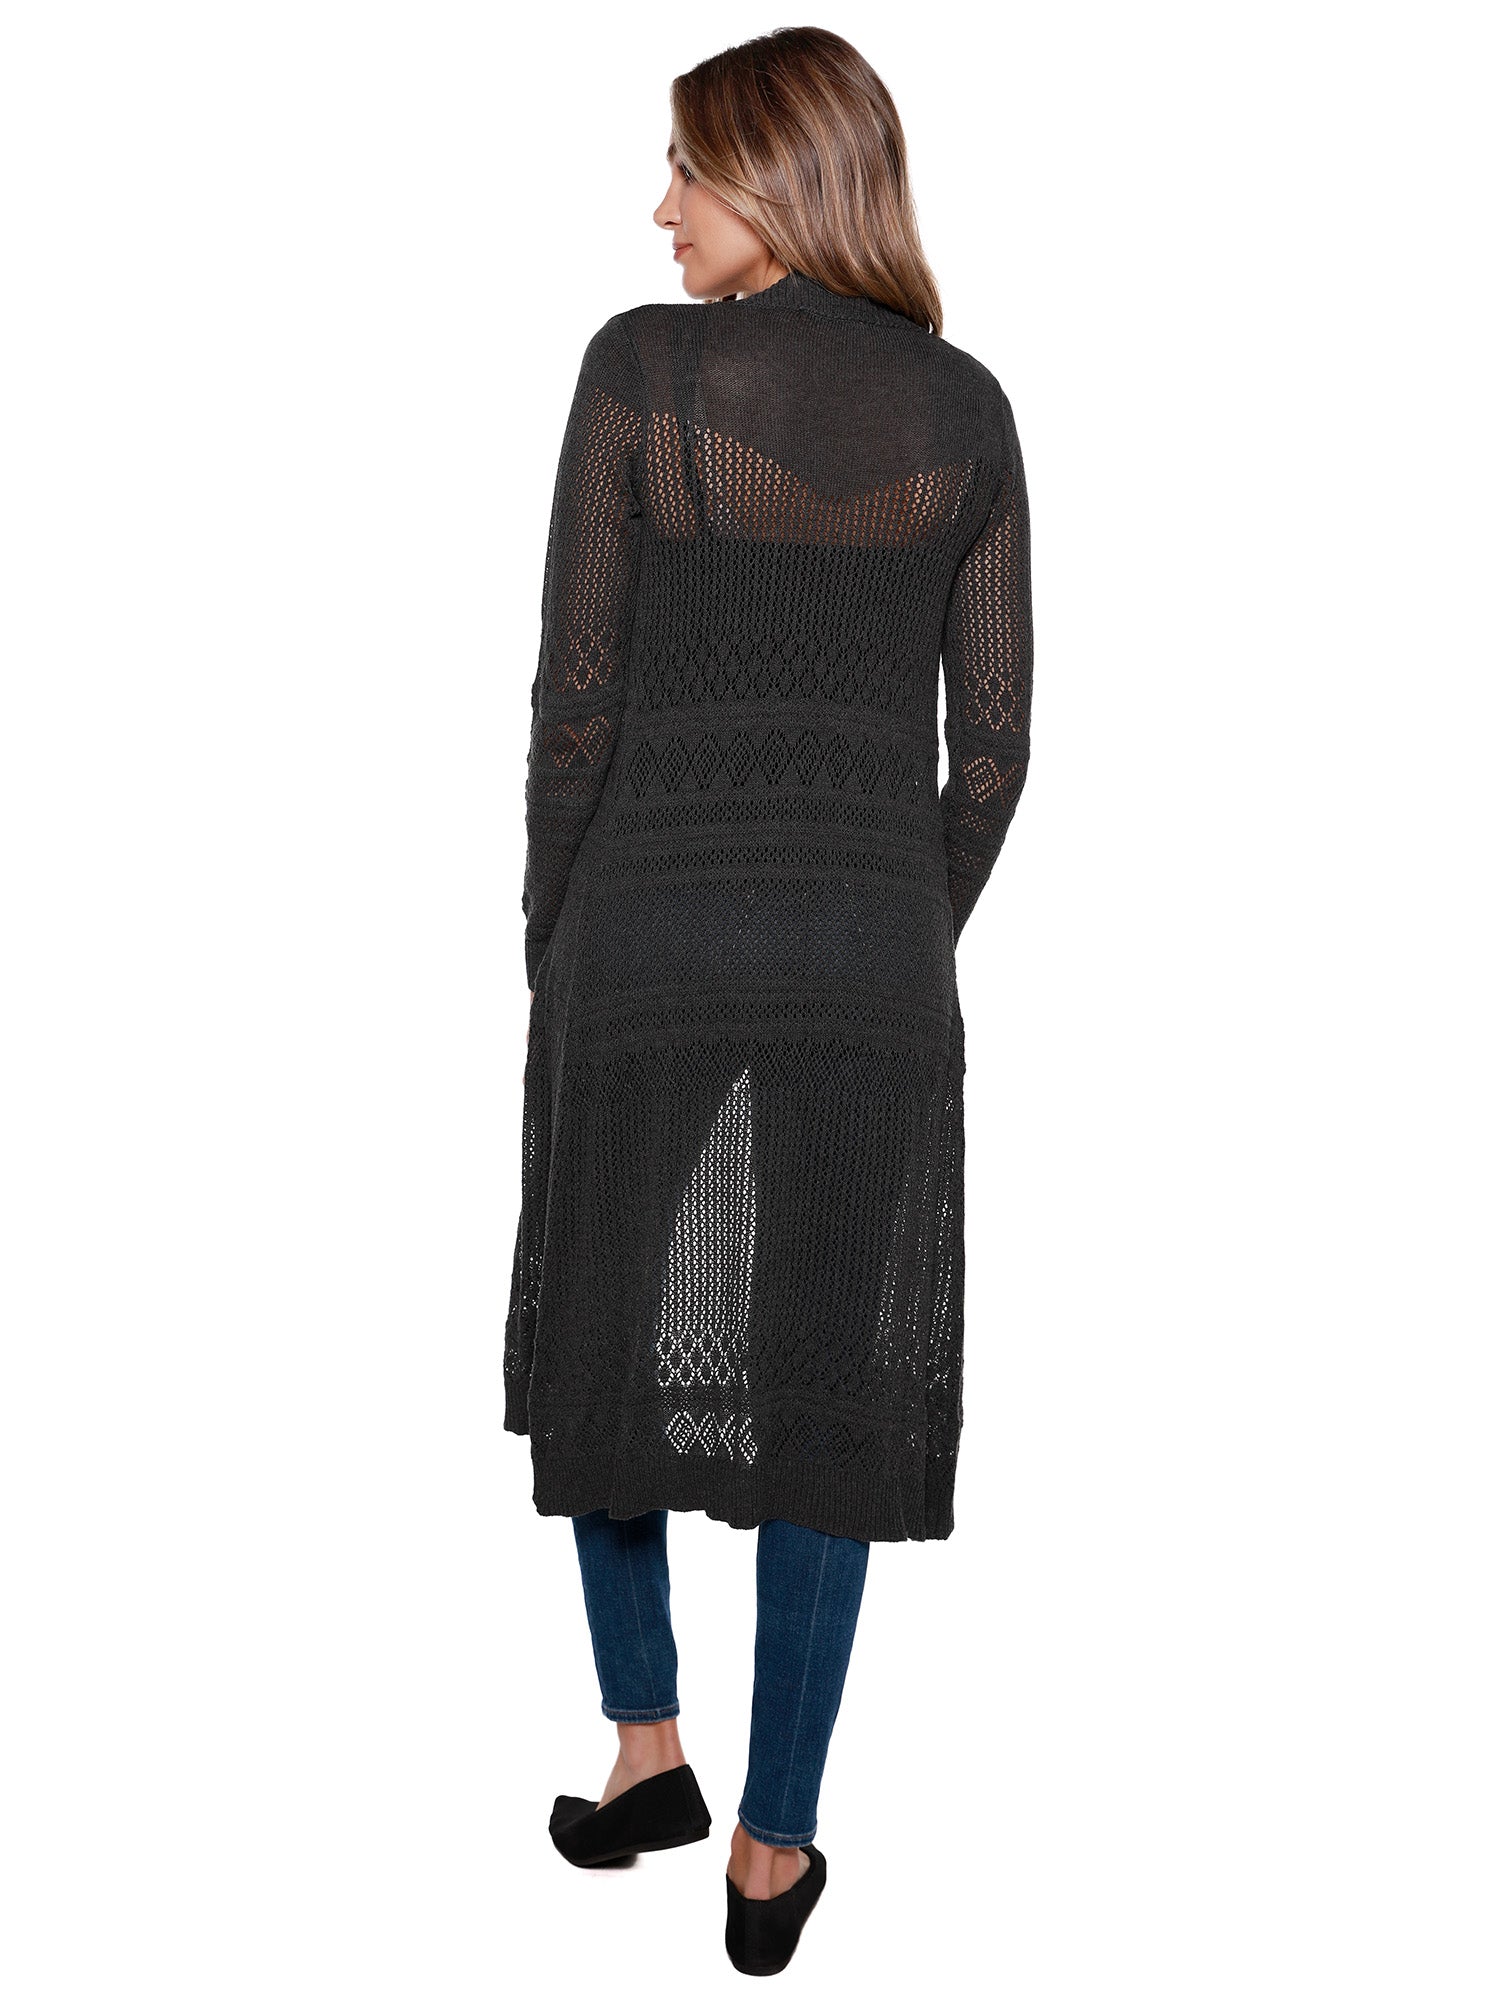 Women's Duster Cardigan in a Crochet Pointelle Stitch Long Sleeves and an Open Front